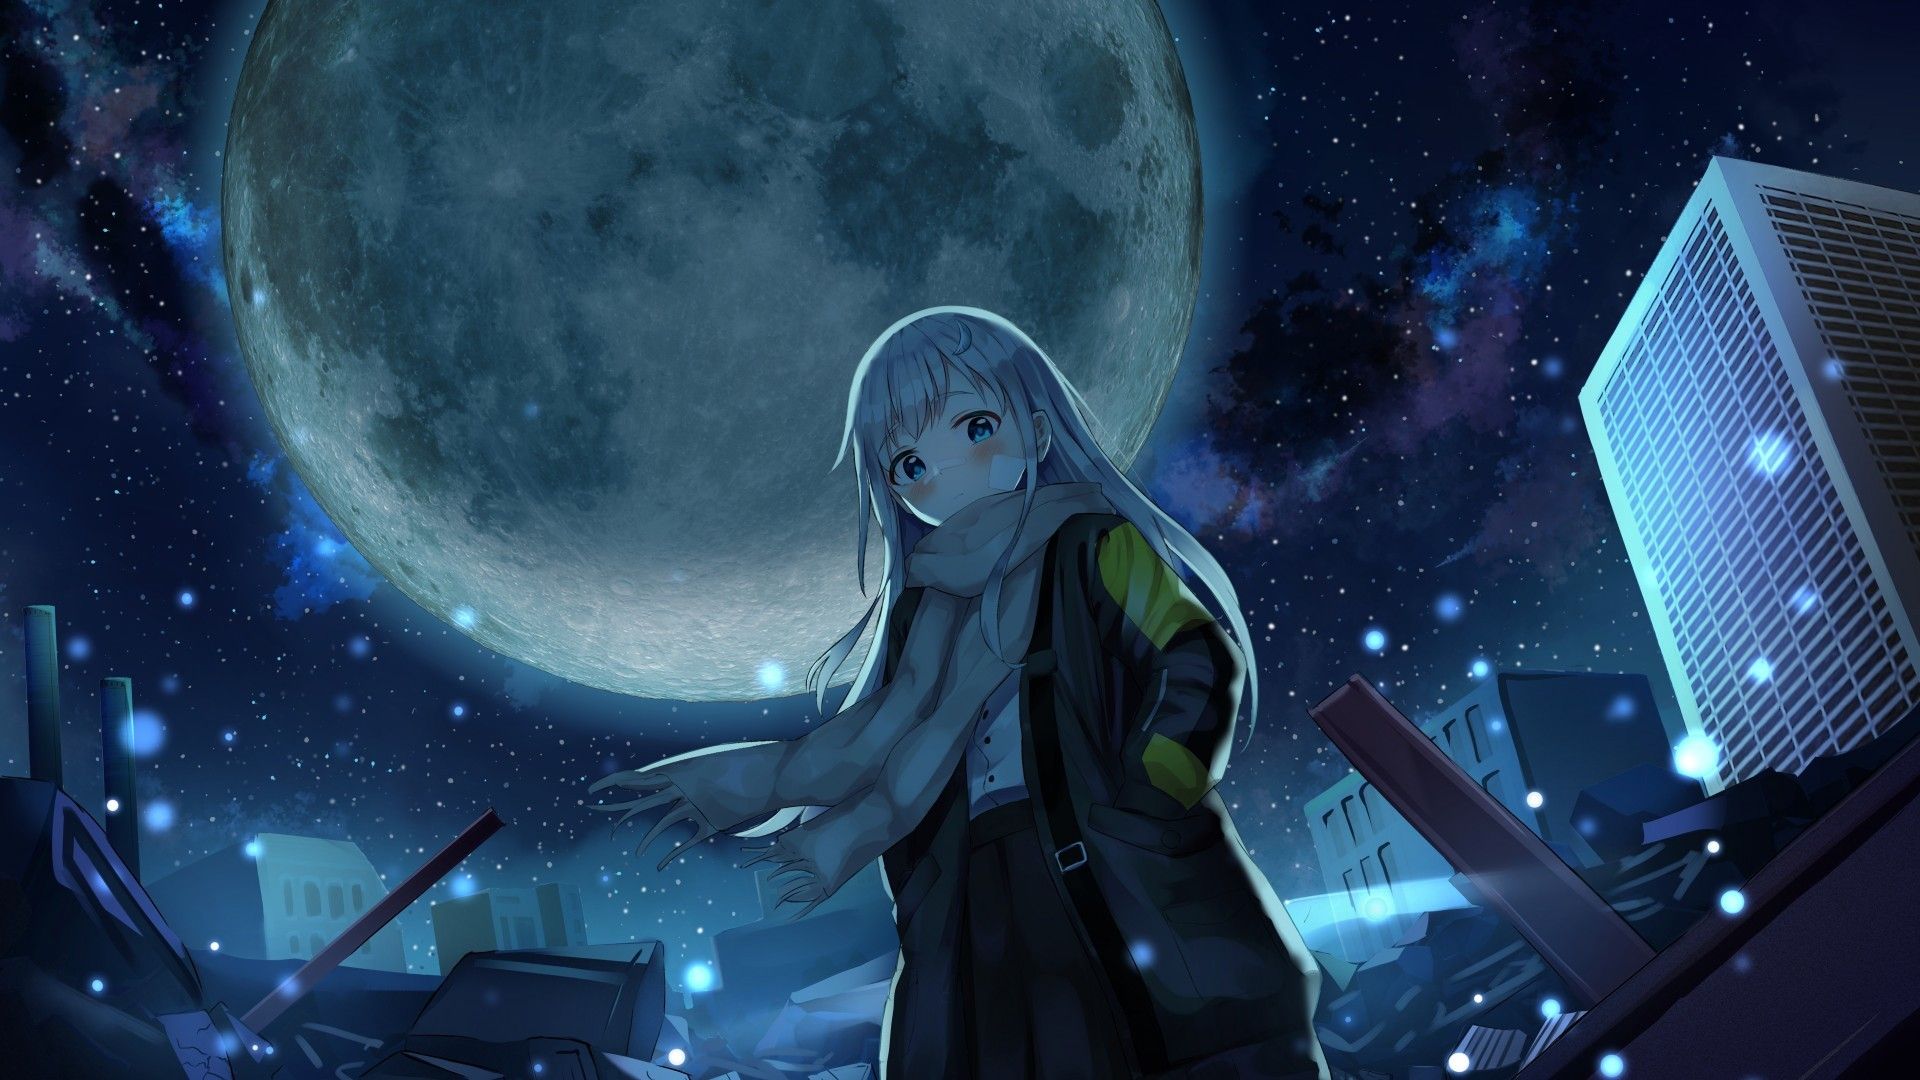 Download 1920x1080 Anime Night, Giant Moon, Starry Sky, Anime Girl, Winter Wallpaper for Widescreen